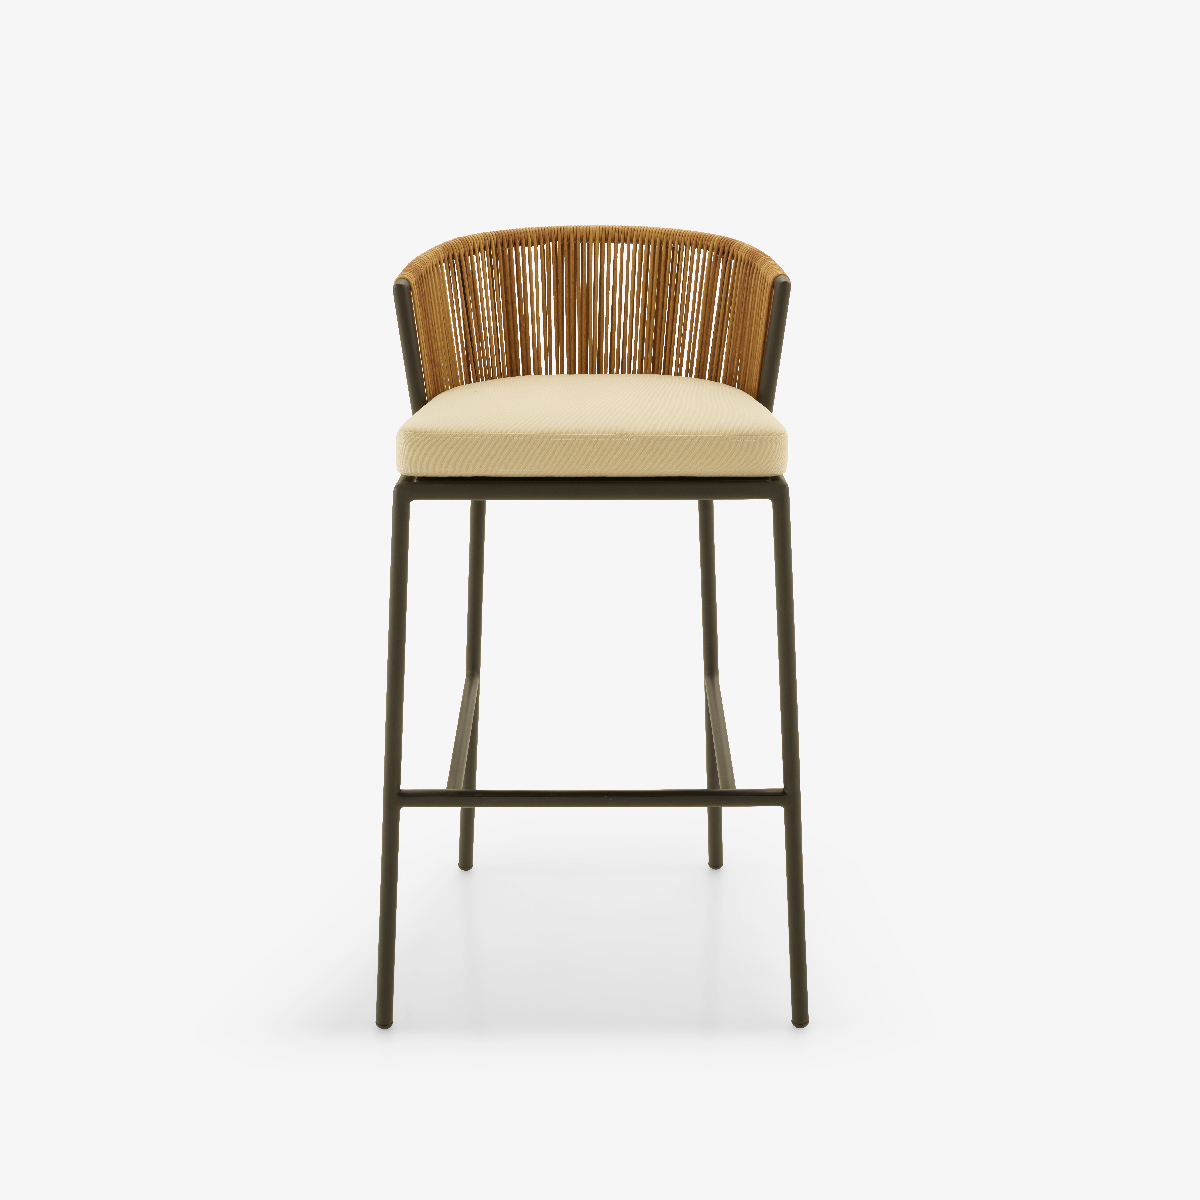 Image Low bar chair   1